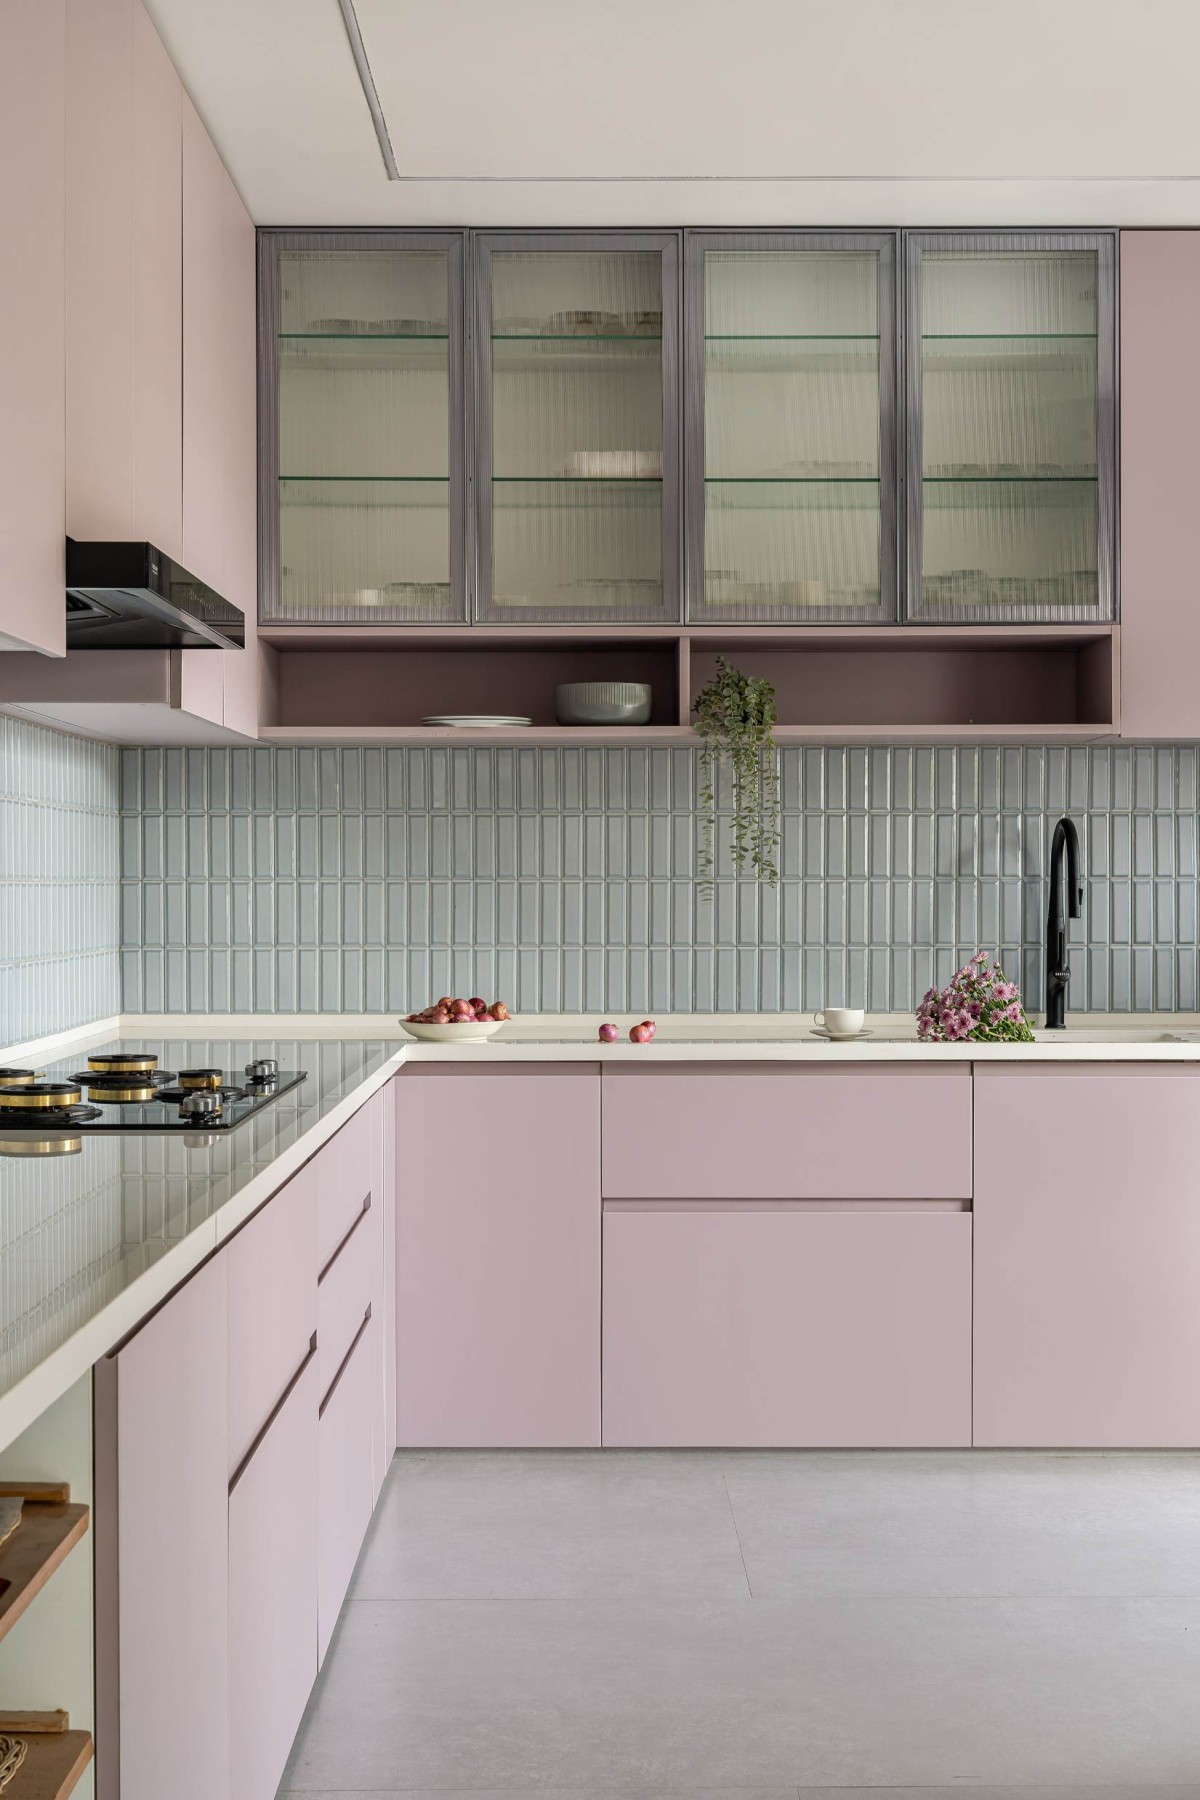 Kitchen of Greige House by LADLAB